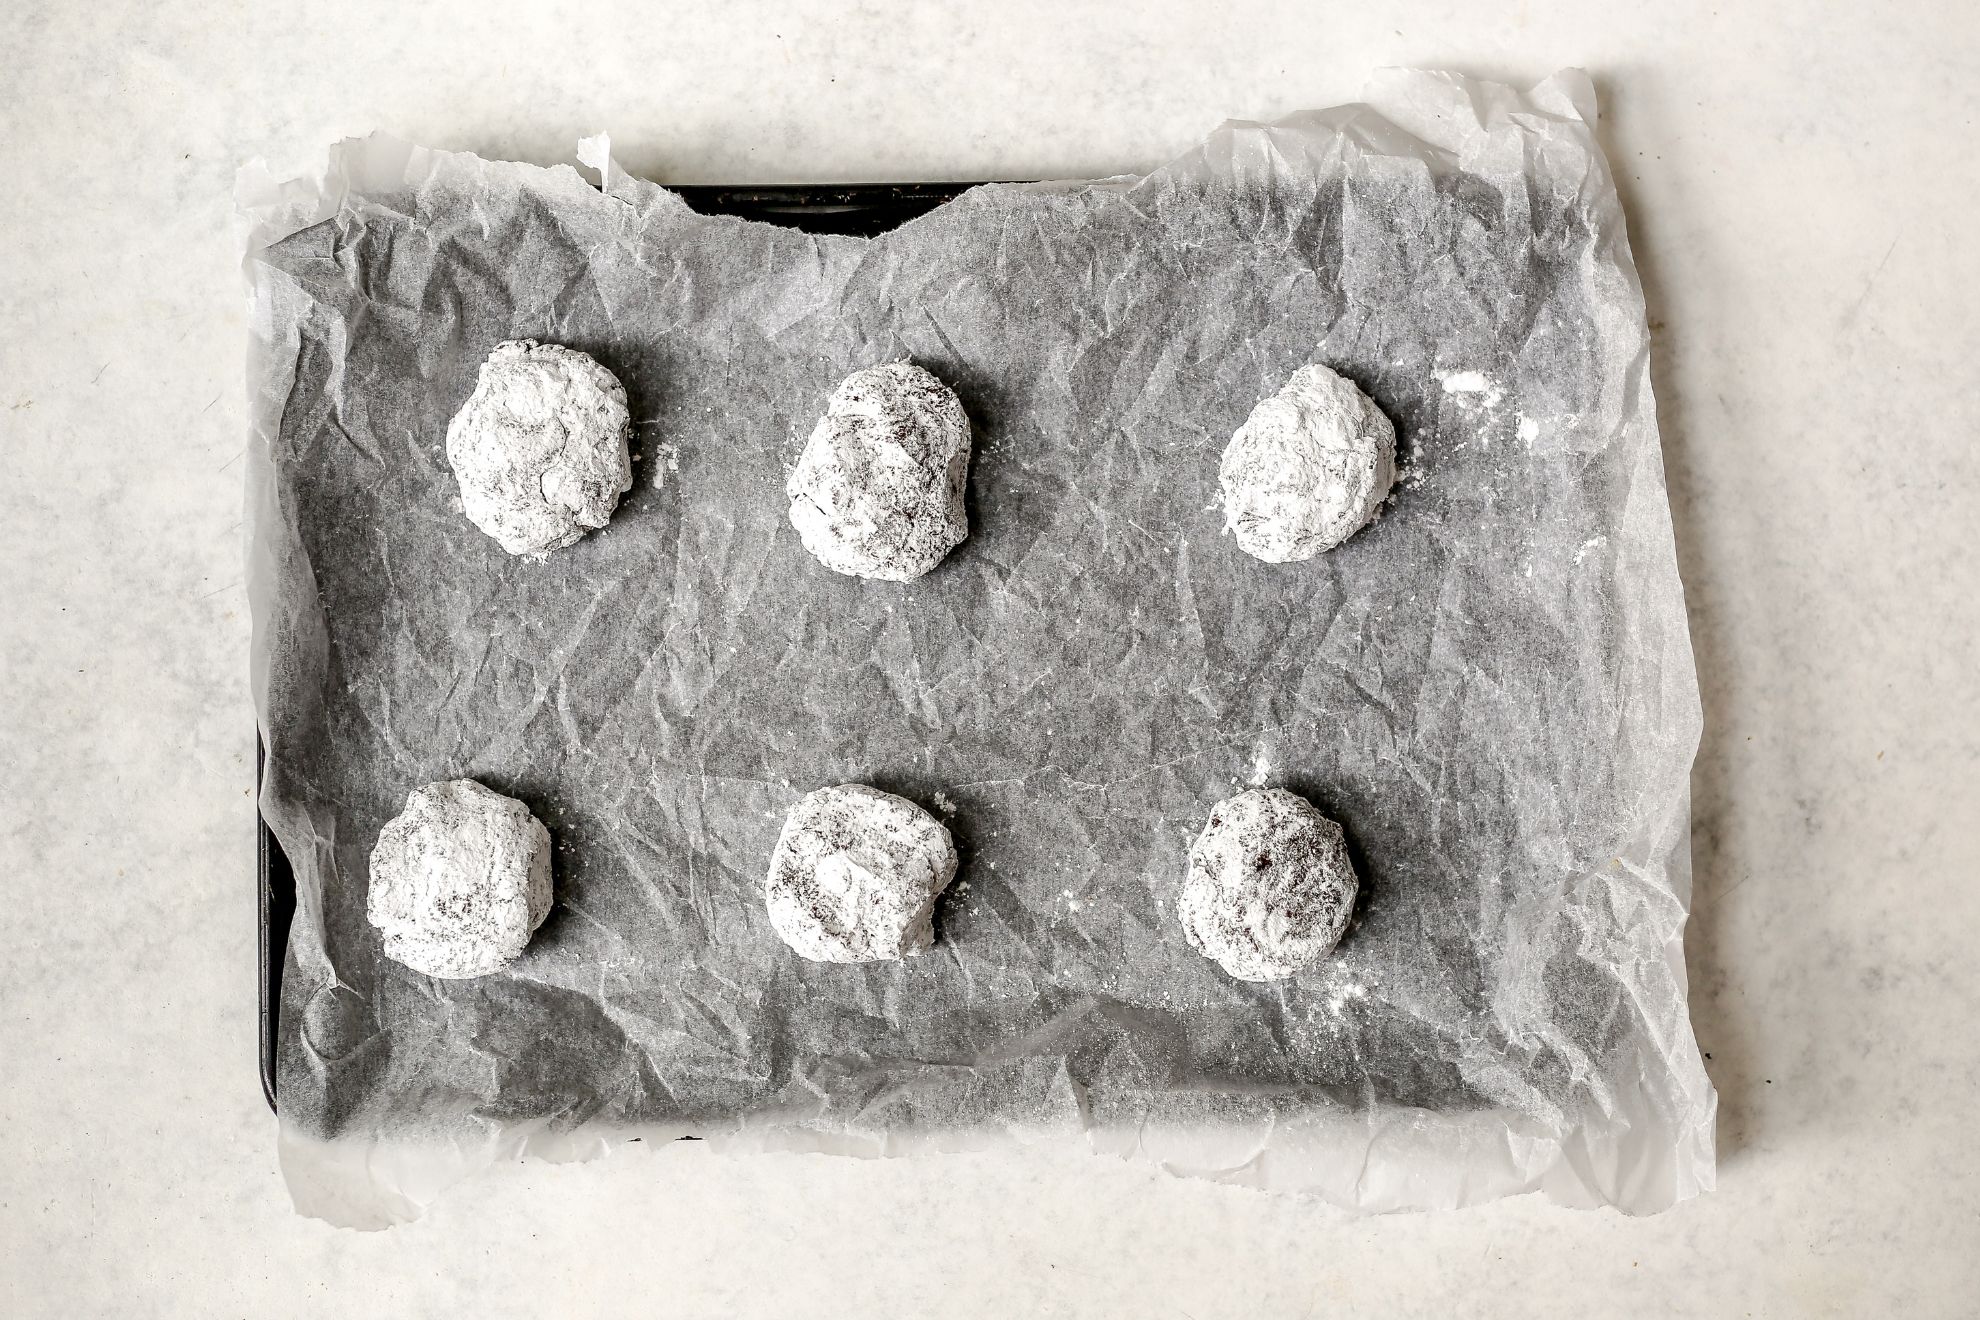 This is an overhead horizontal image of a baking sheet lined with crinkled white parchment paper. Size cookie dough balls coated with powdered sugar are on the baking sheet. The baking sheet sits on a light grey surface.